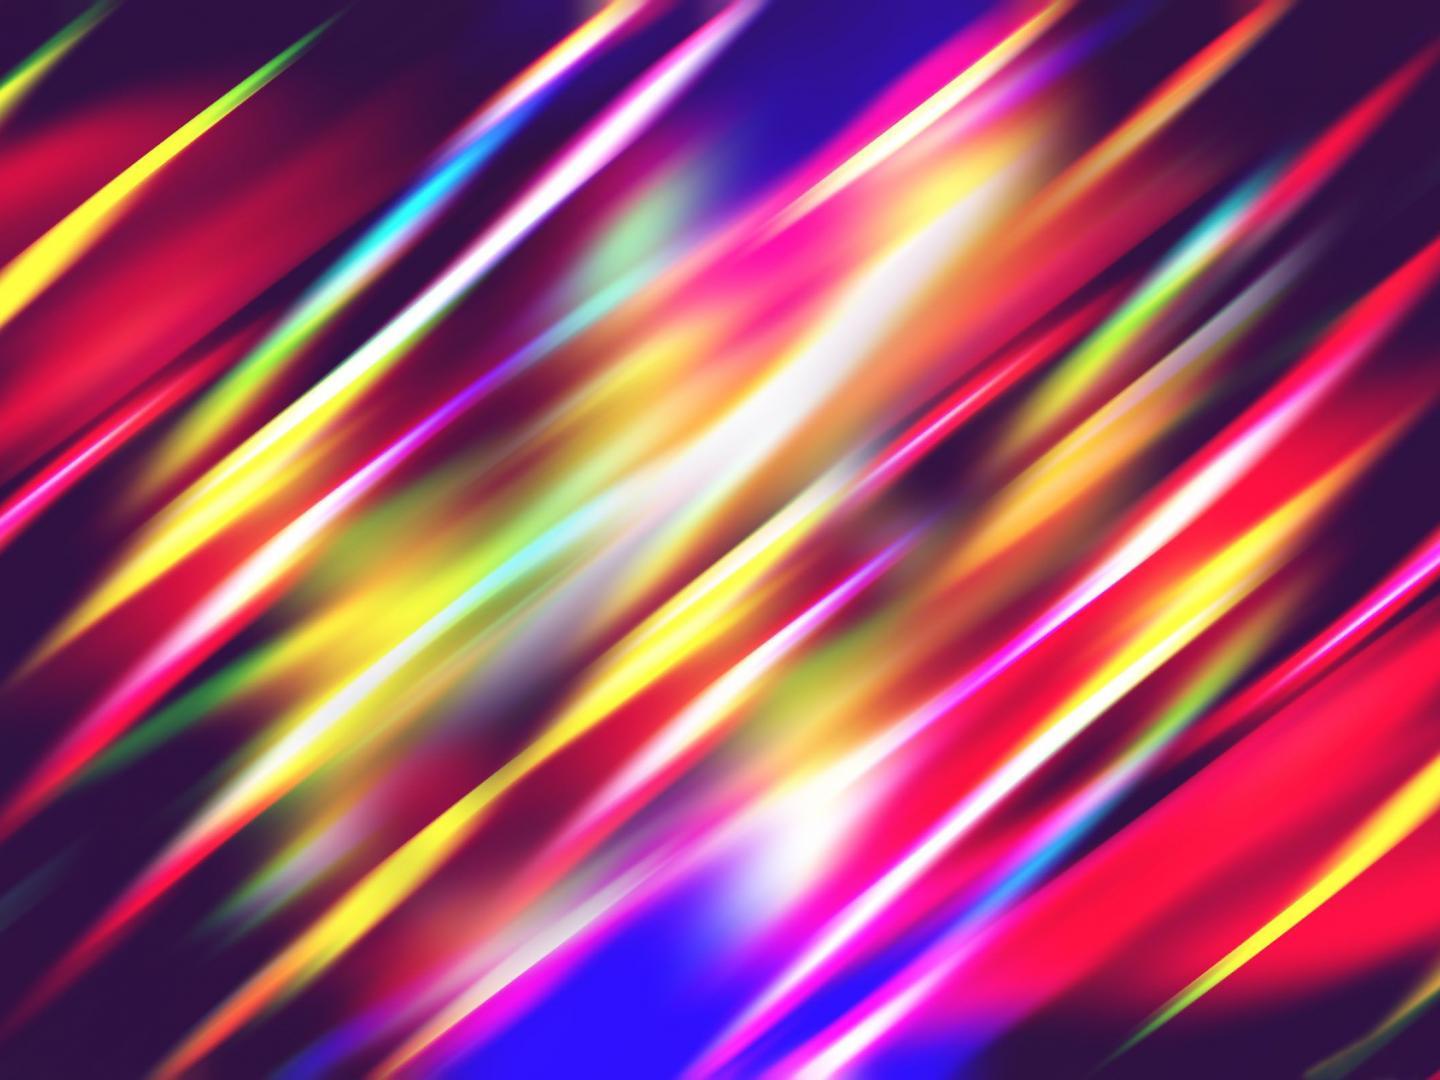 Colorful Abstract Wallpaper, Amazing High Definition Colorful